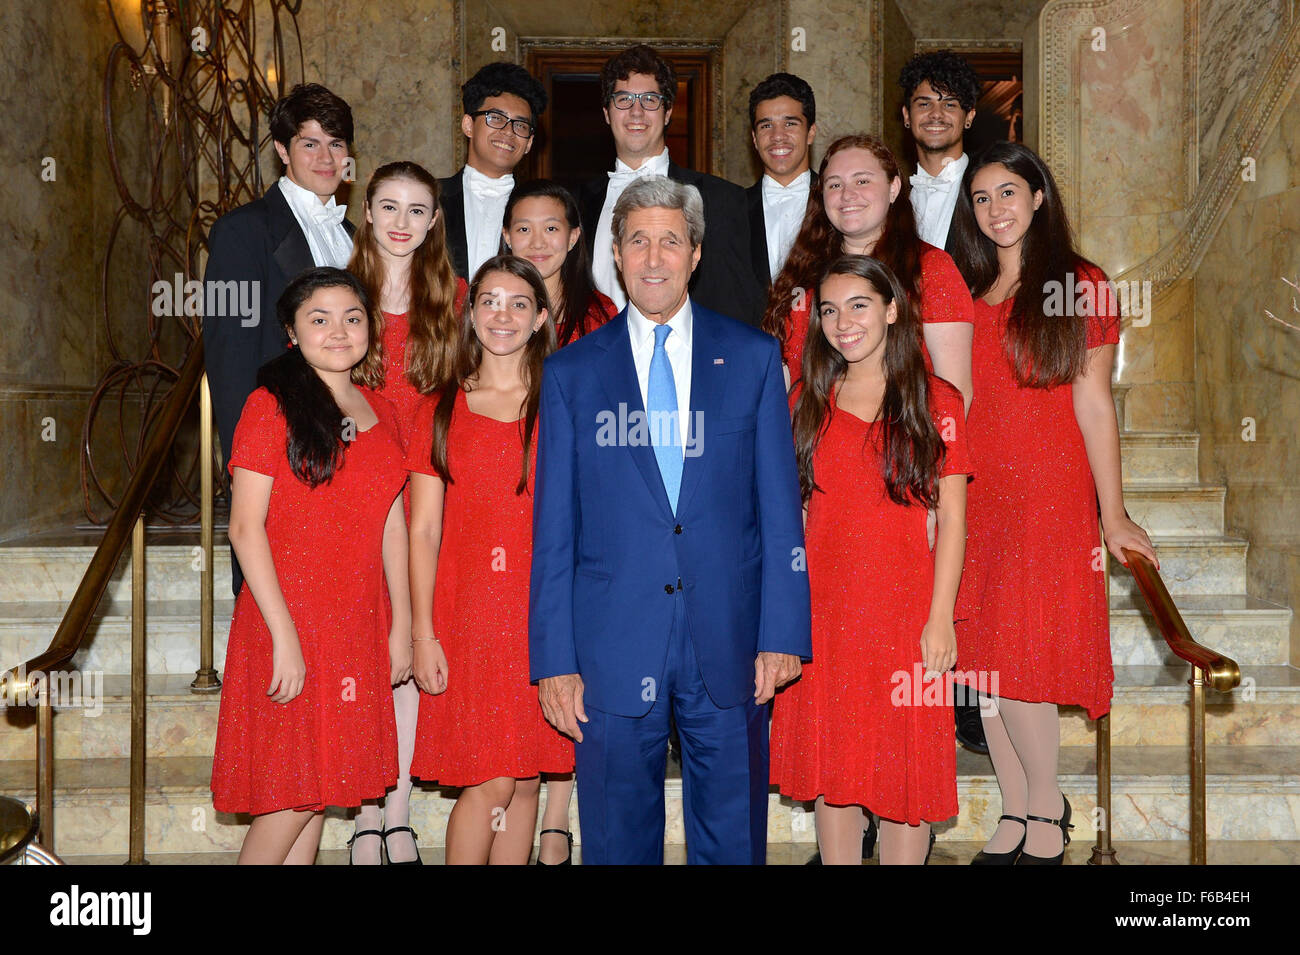 Secretary Kerry Poses for a Photo With the LaGuardia High School Choir Who Performed at the Transatlantic Reception in New York City Stock Photo